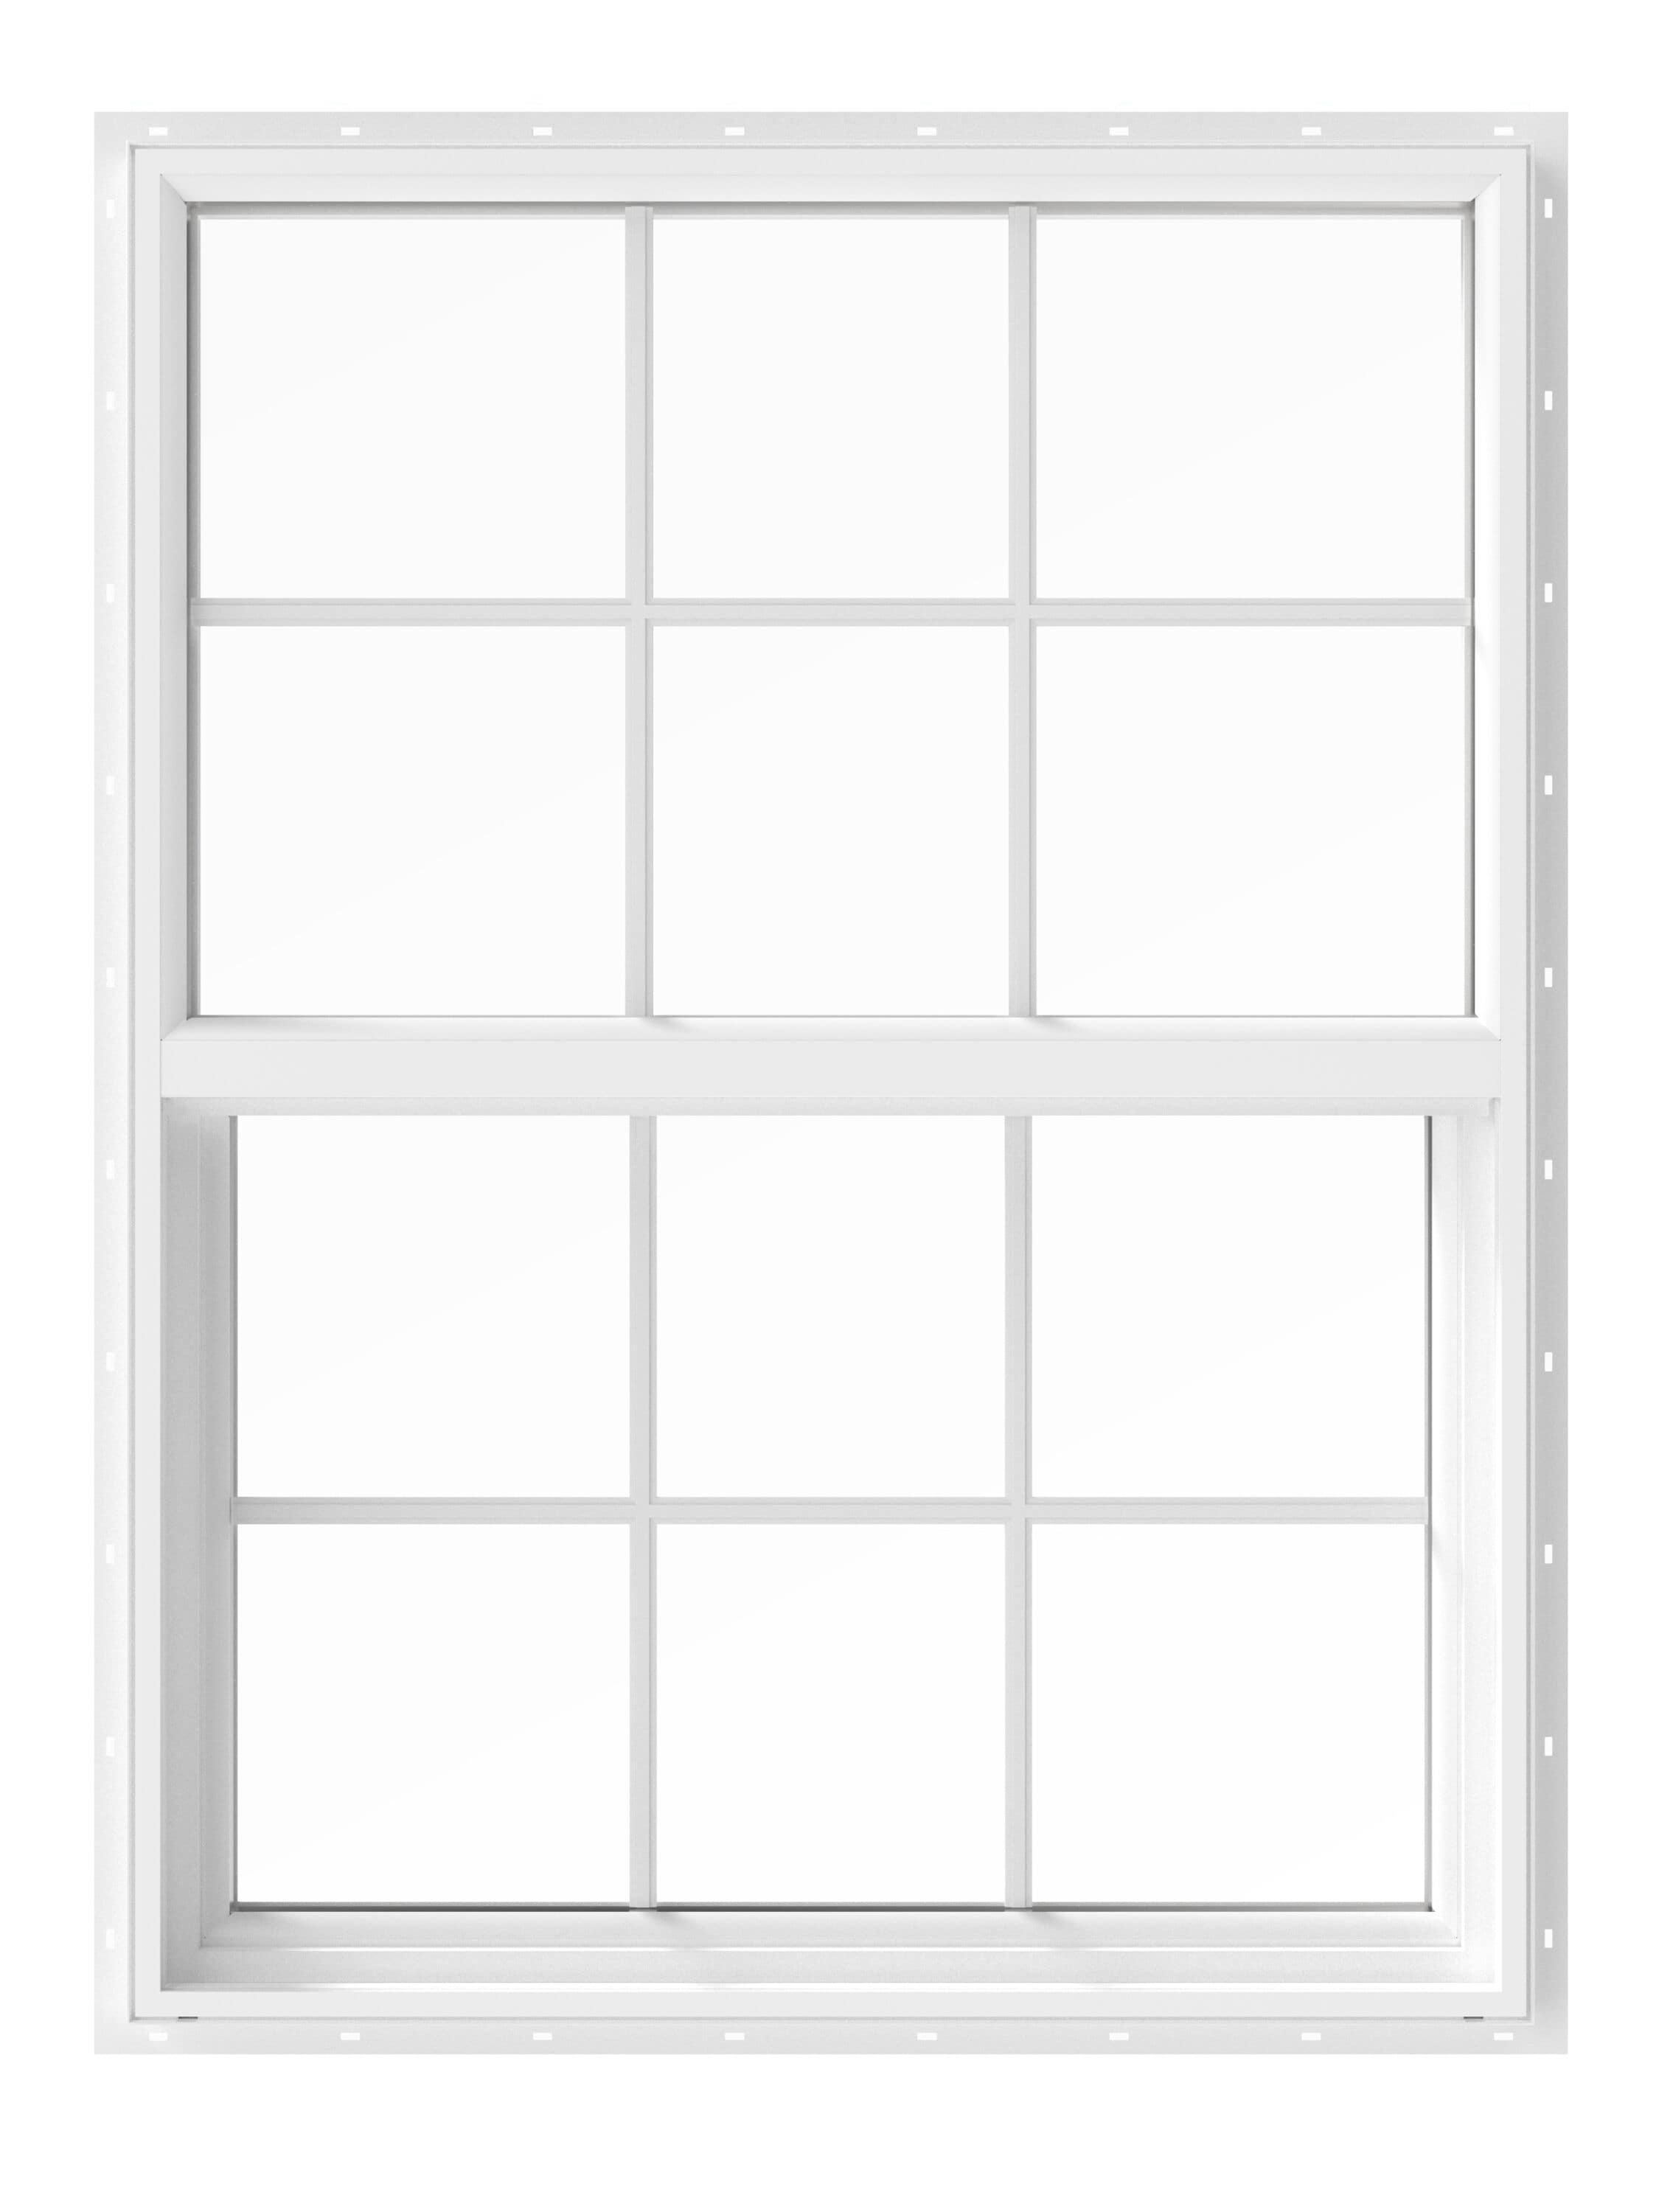 Pella 150 Series New Construction 23.5-in x 35.5-in x 2.6875-in Jamb White Vinyl Low-e Argon Single Hung Window with Grids Half Screen Included -  1000011002